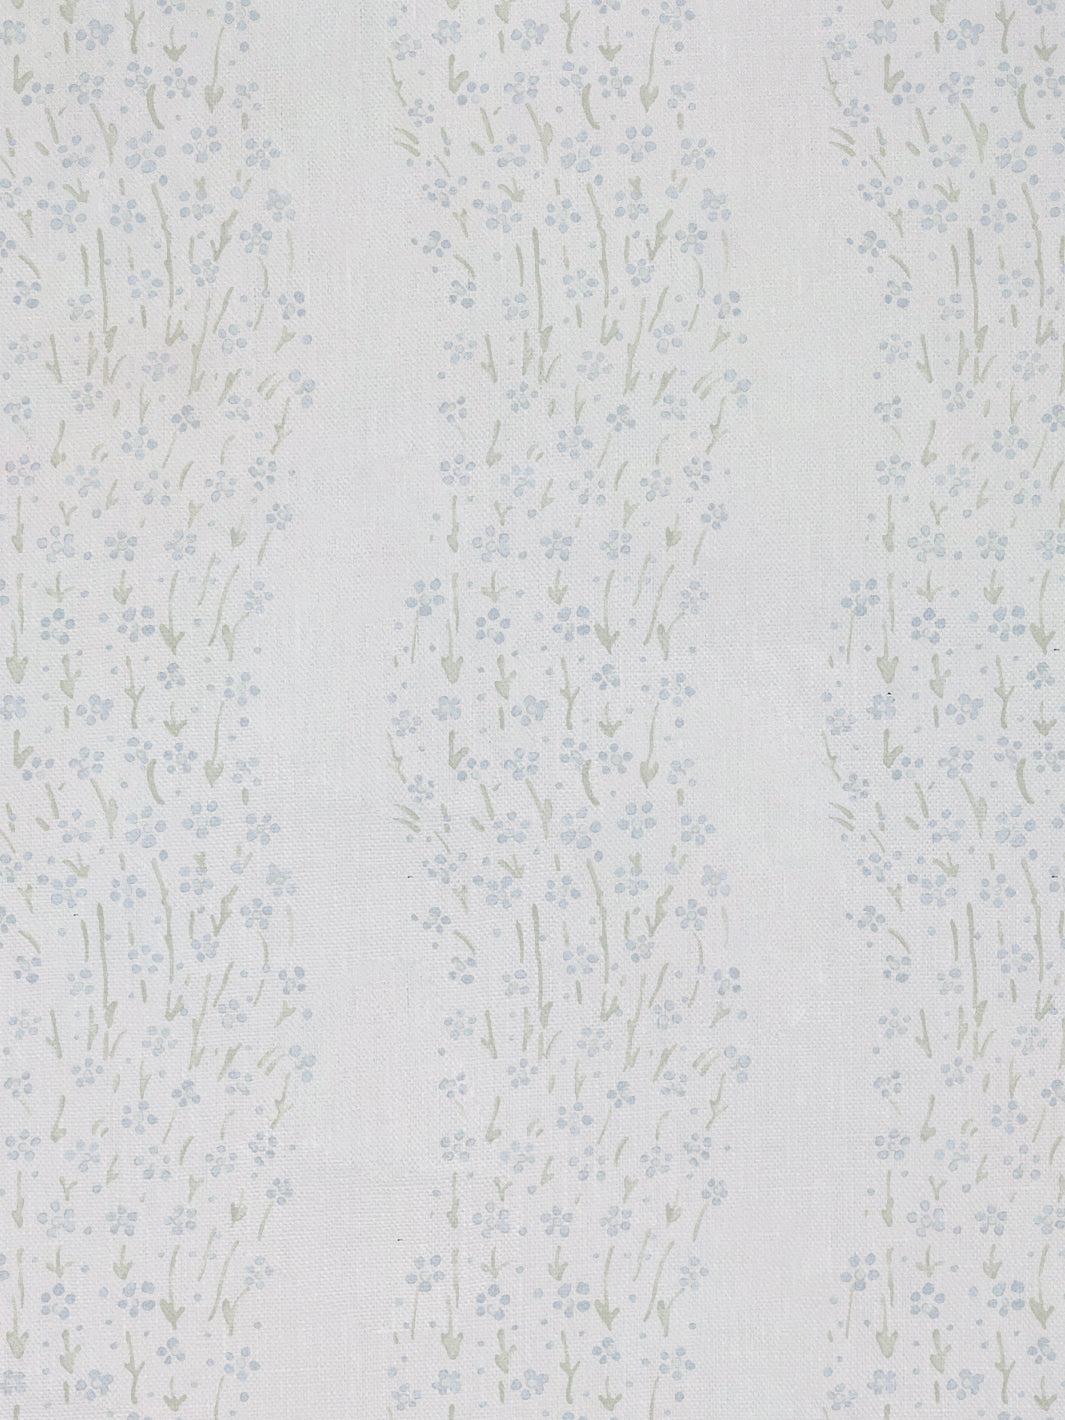 'Hillhouse Floral Ditsy Wave' Linen Fabric by Nathan Turner - Blue Green